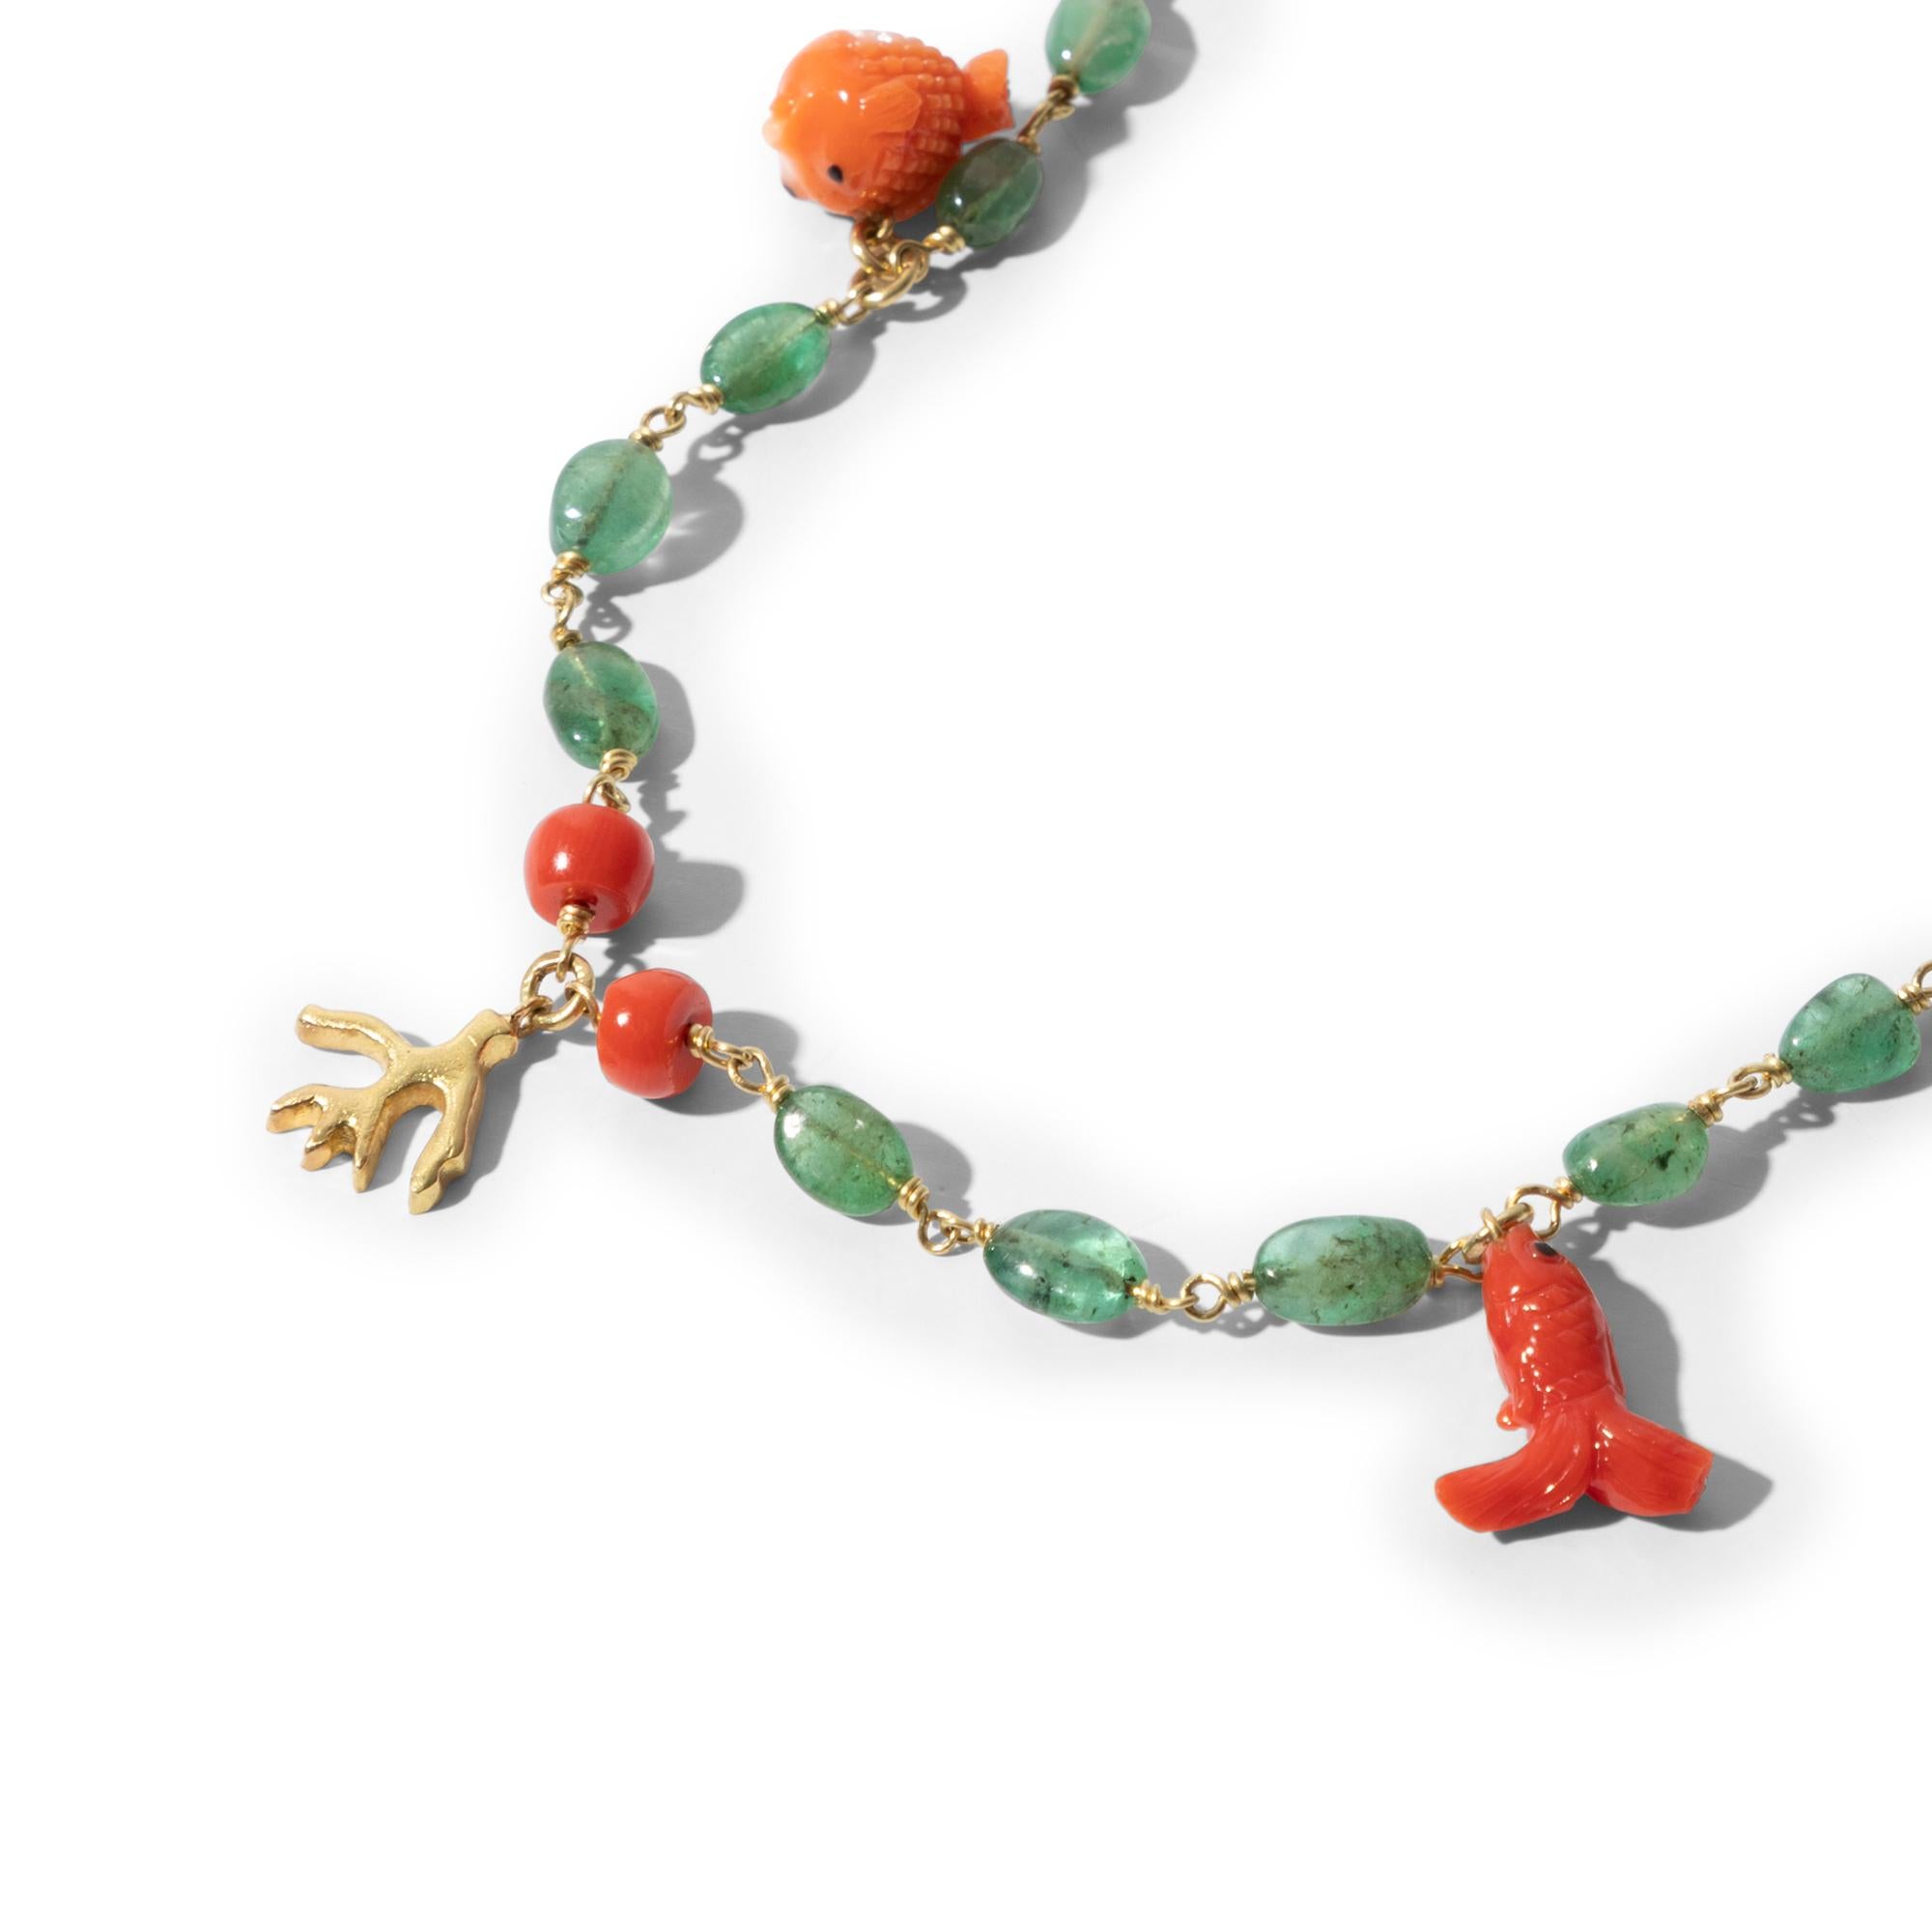 Artisan 18k Gold Charm Bracelet with Coral Fish and Emerald Beads For Sale